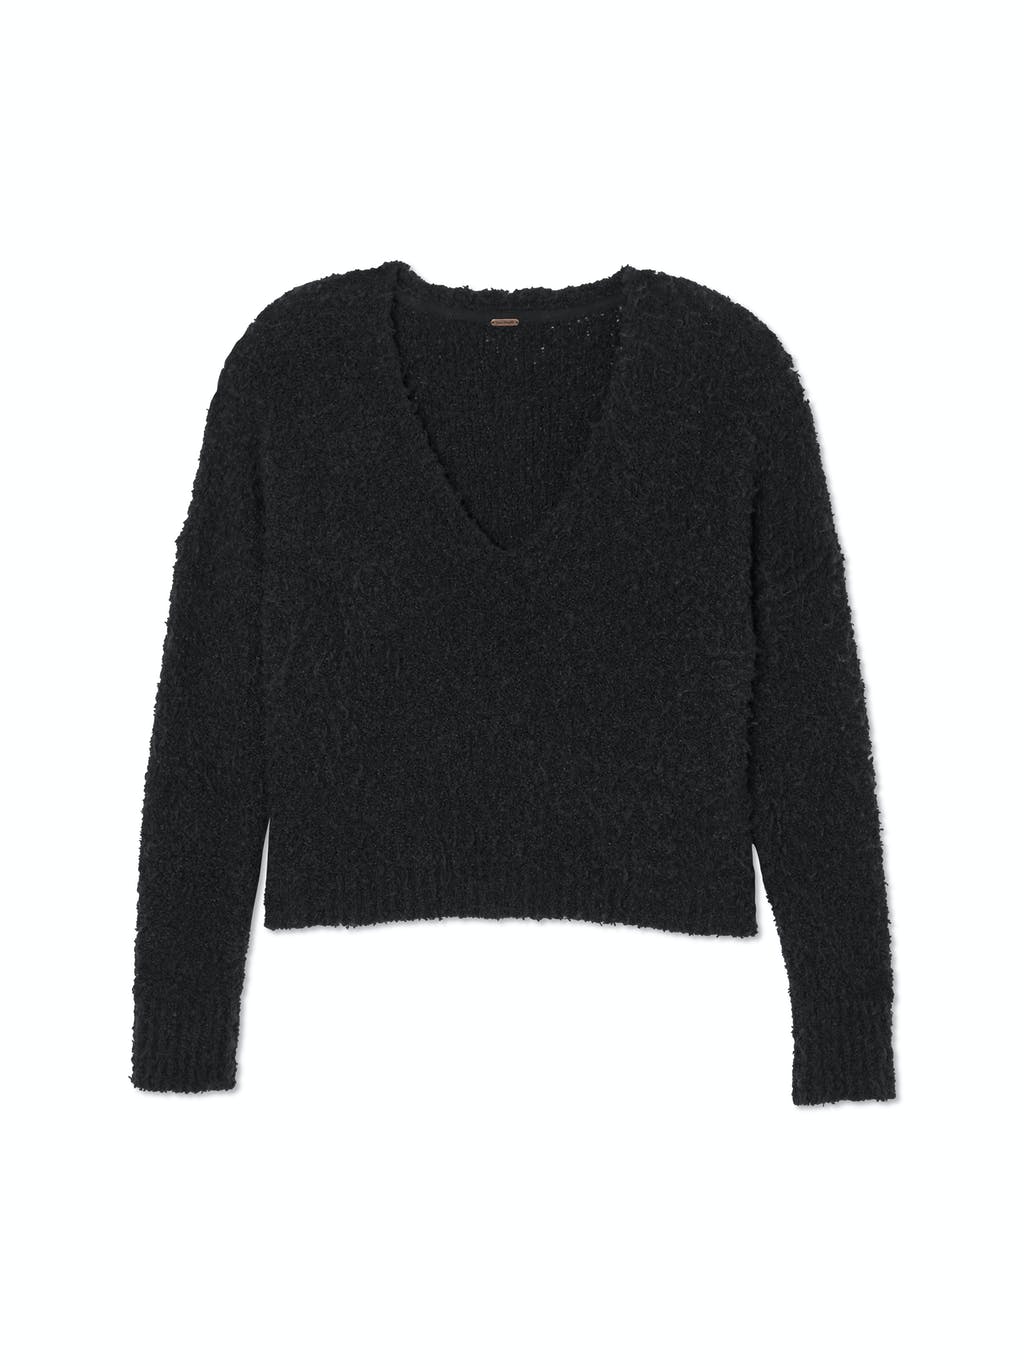 Finders Keepers V-Neck Sweater